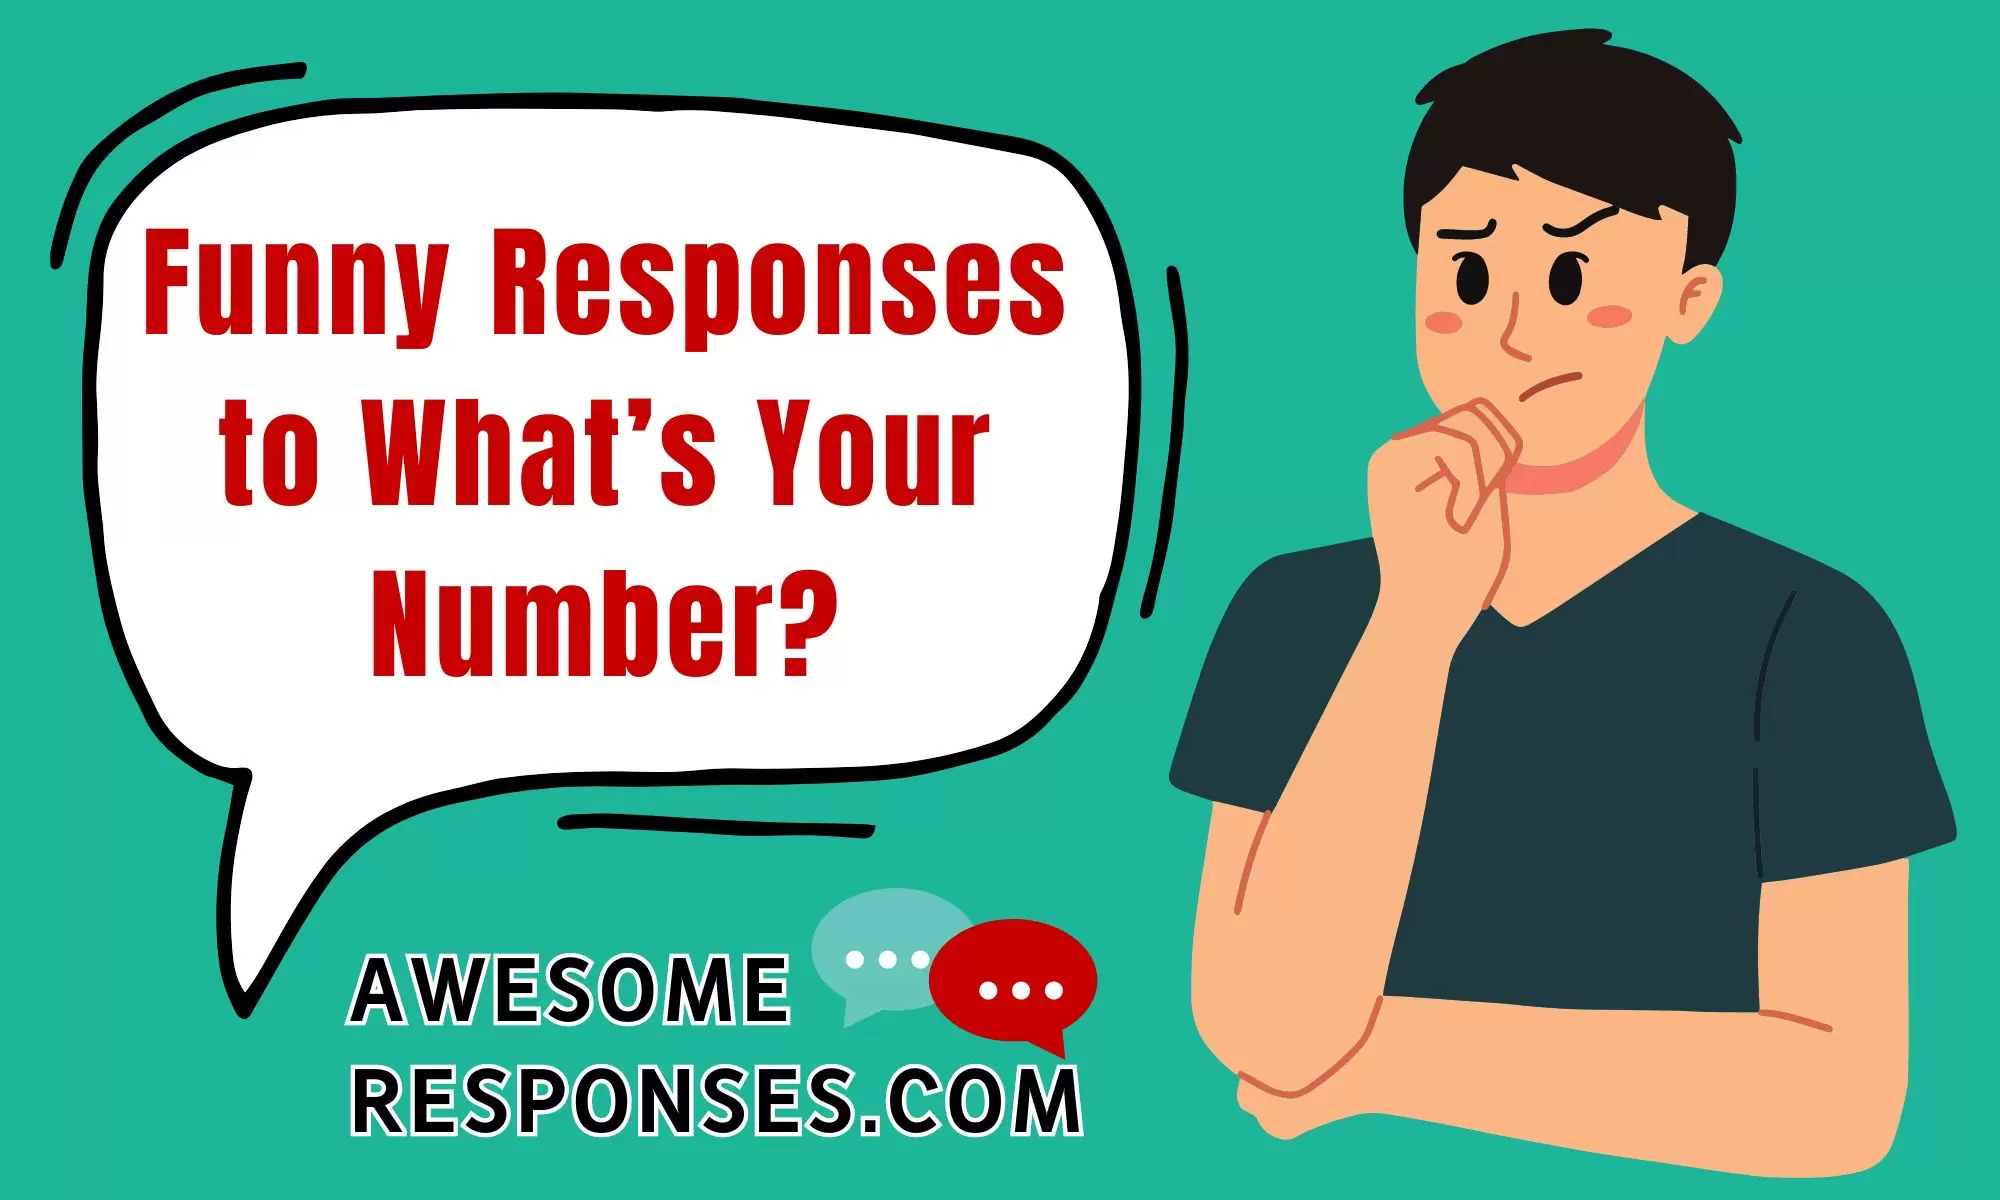 Funny Responses to What’s Your Number?